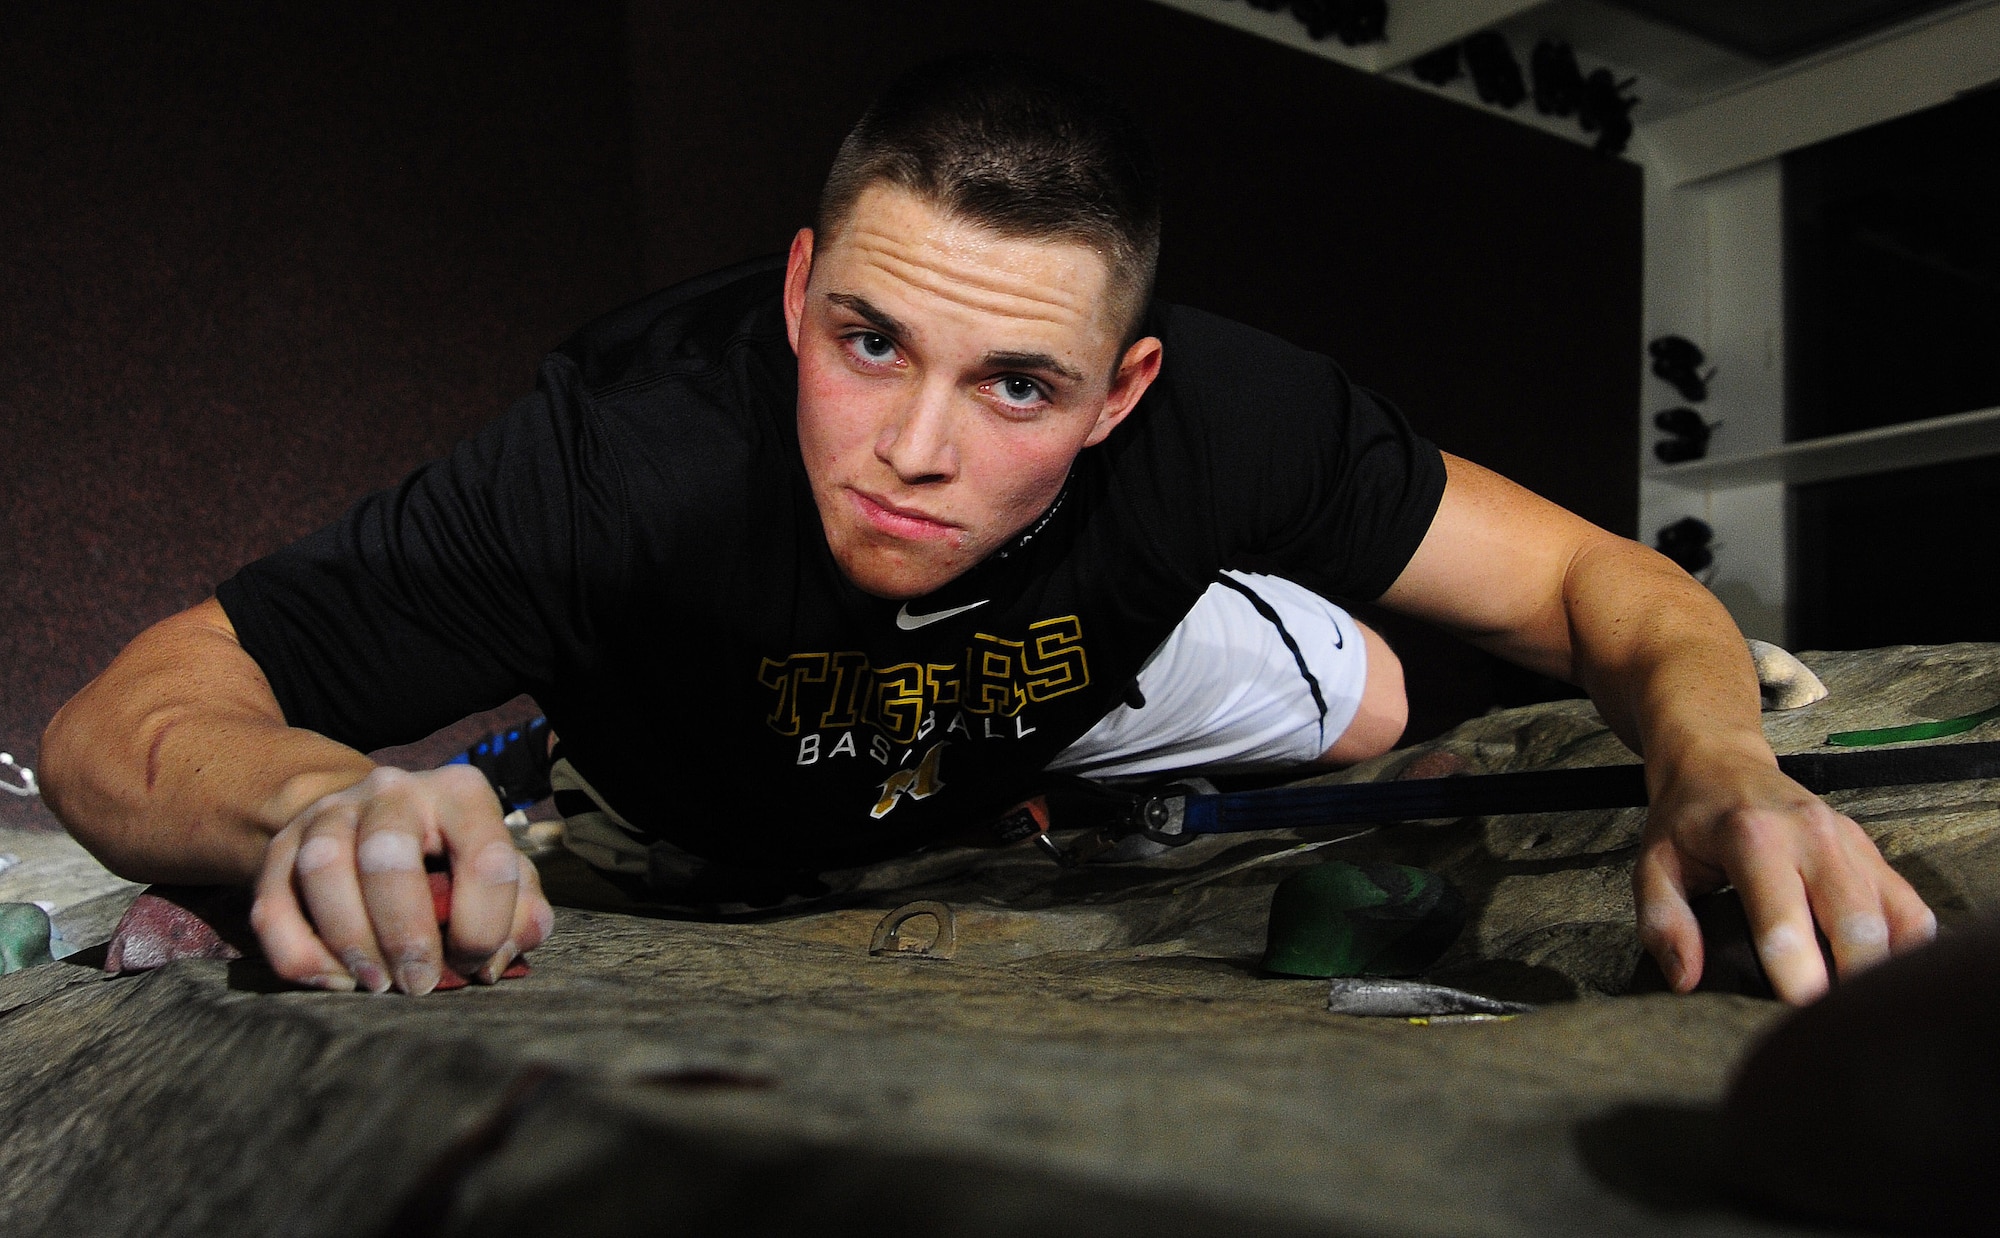 WARRENSBURG, Mo. -- Airman 1st Class Jason Ingalls, 131st Aircraft Maintenance Squadron aircraft armament systems apprentice, climbs a rock wall during a “Late Night at UCM” event at the University of Central Missouri in the recreation center March 16. The overall mission and vision of Wing It is to not only reduce underage drinking, but also build a community of Airmen and students who participate in alcohol-free events and assist the local community through volunteering and event planning. (U.S. Air Force photo/Senior Airman Nick Wilson)